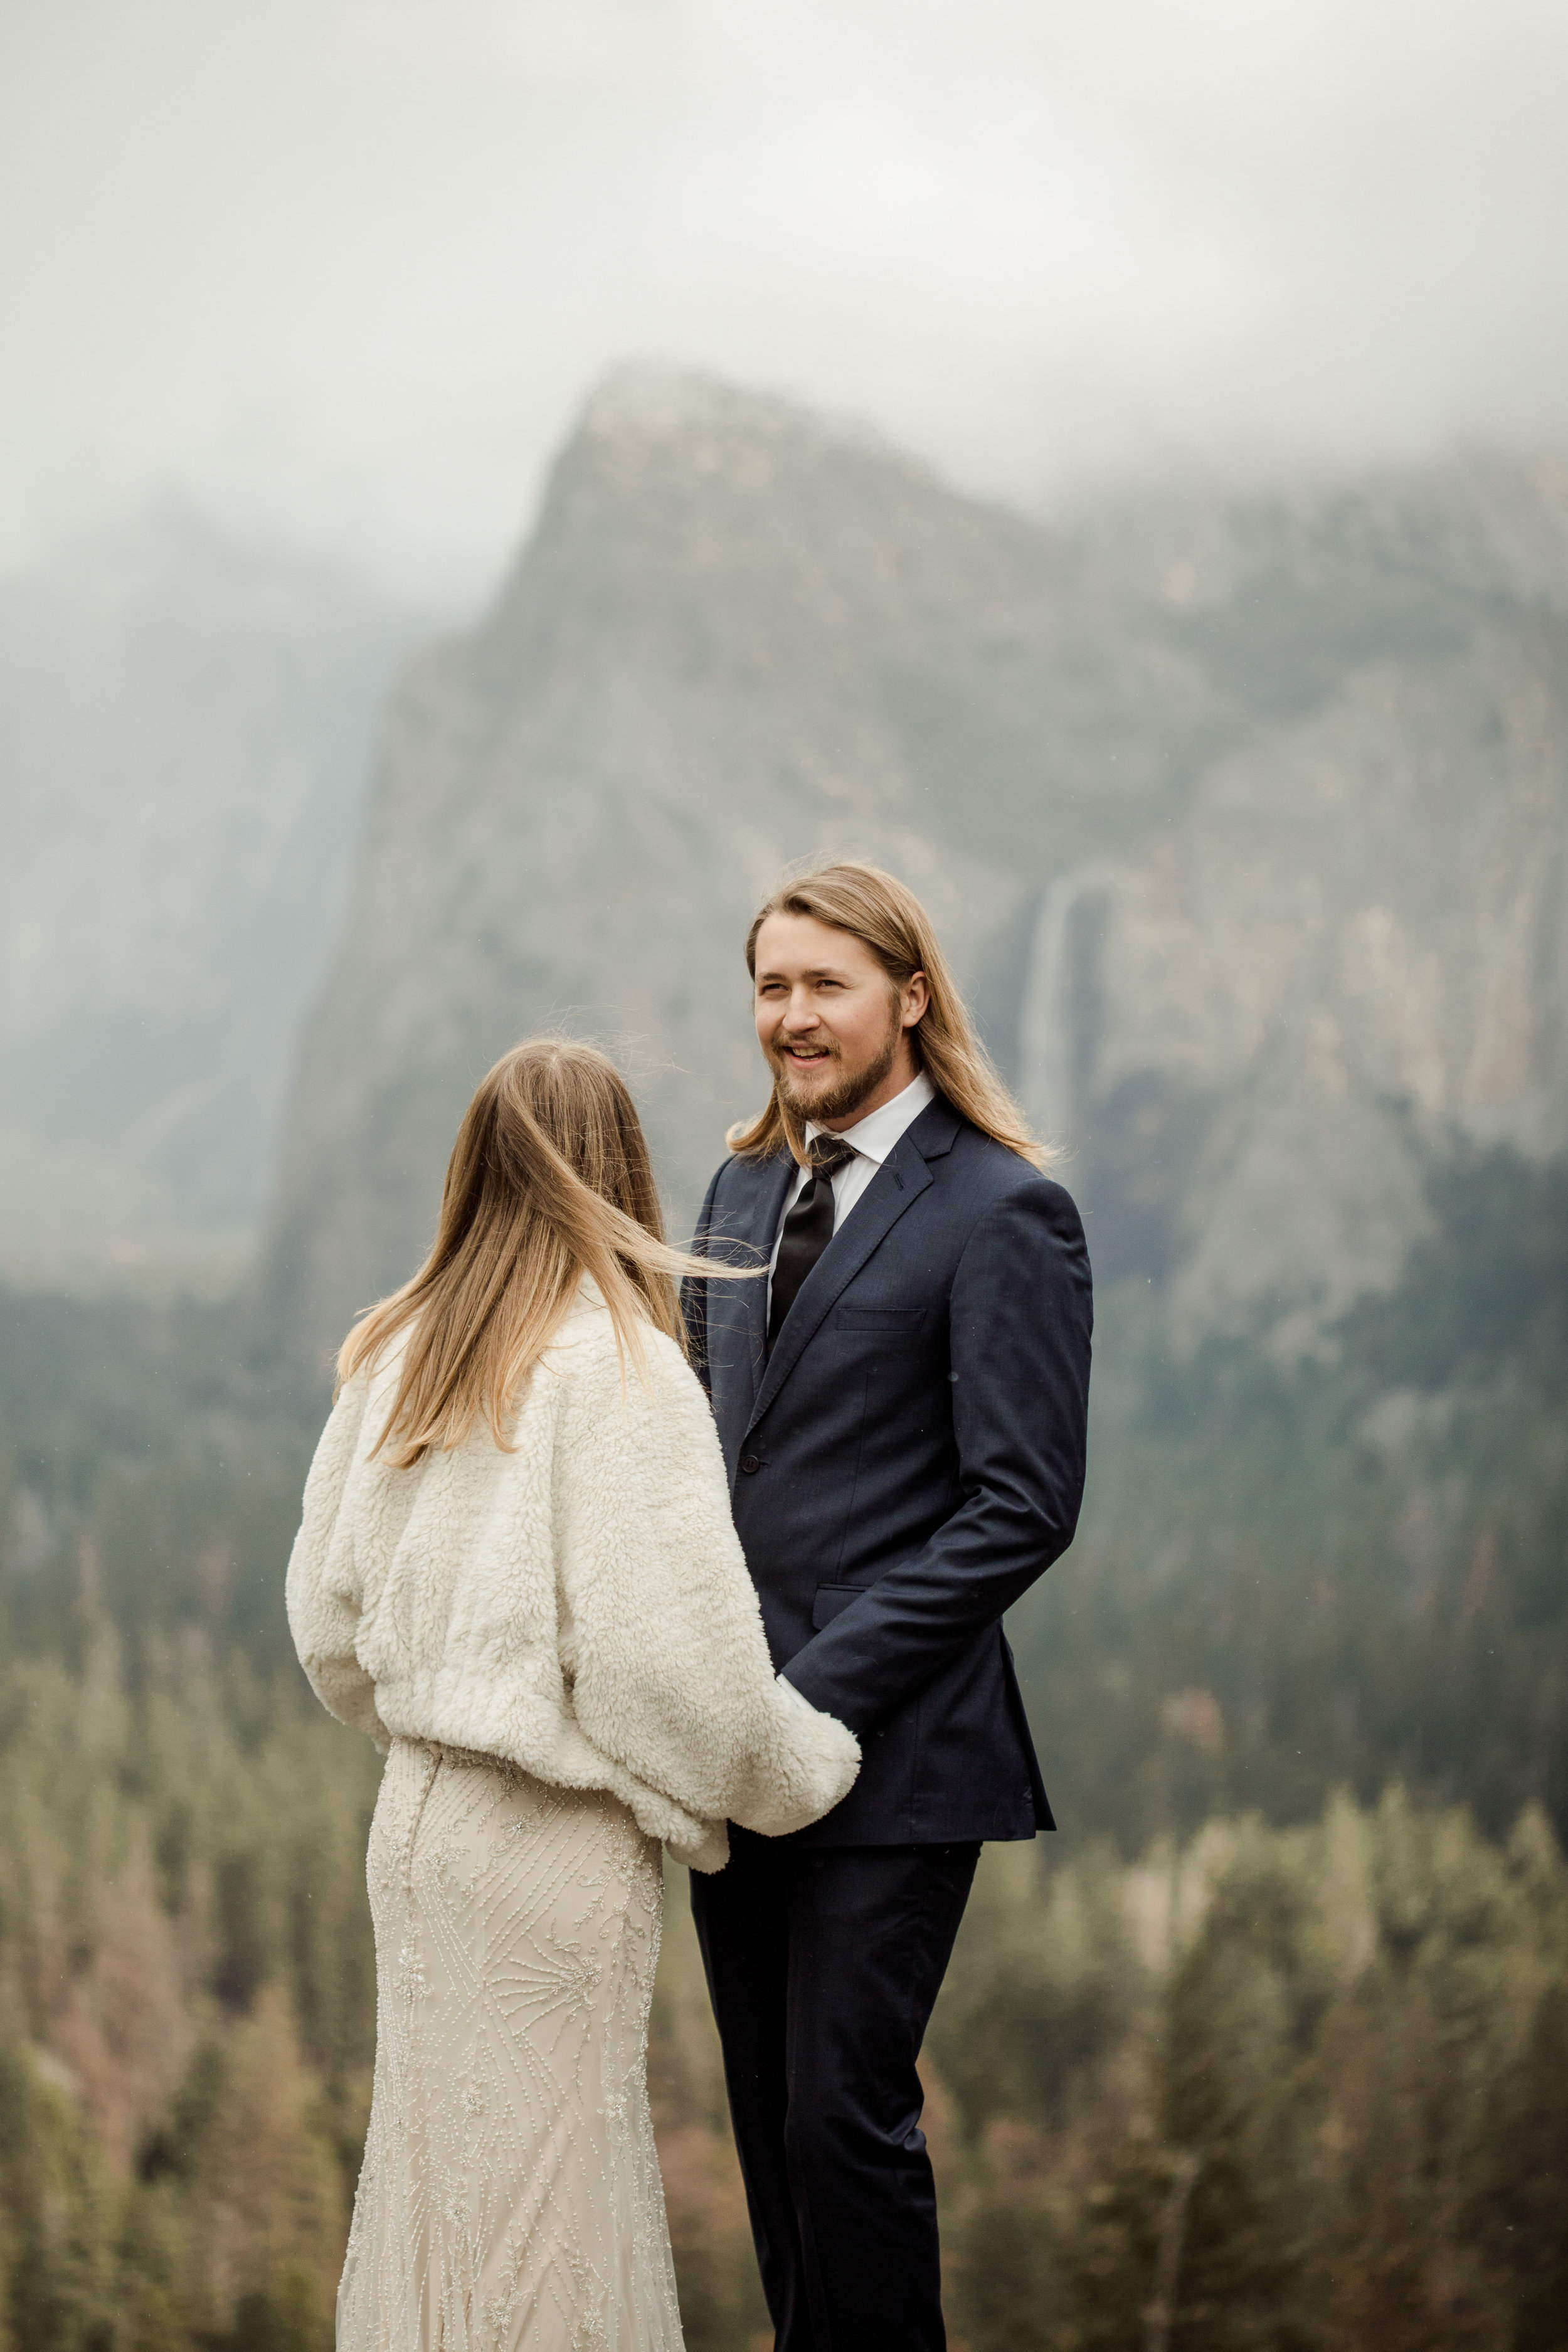 nicole-daacke-photography-yousemite-national-park-elopement-photographer-winter-cloud-moody-elope-inspiration-yosemite-valley-tunnel-view-winter-cloud-fog-weather-wedding-photos-8.jpg